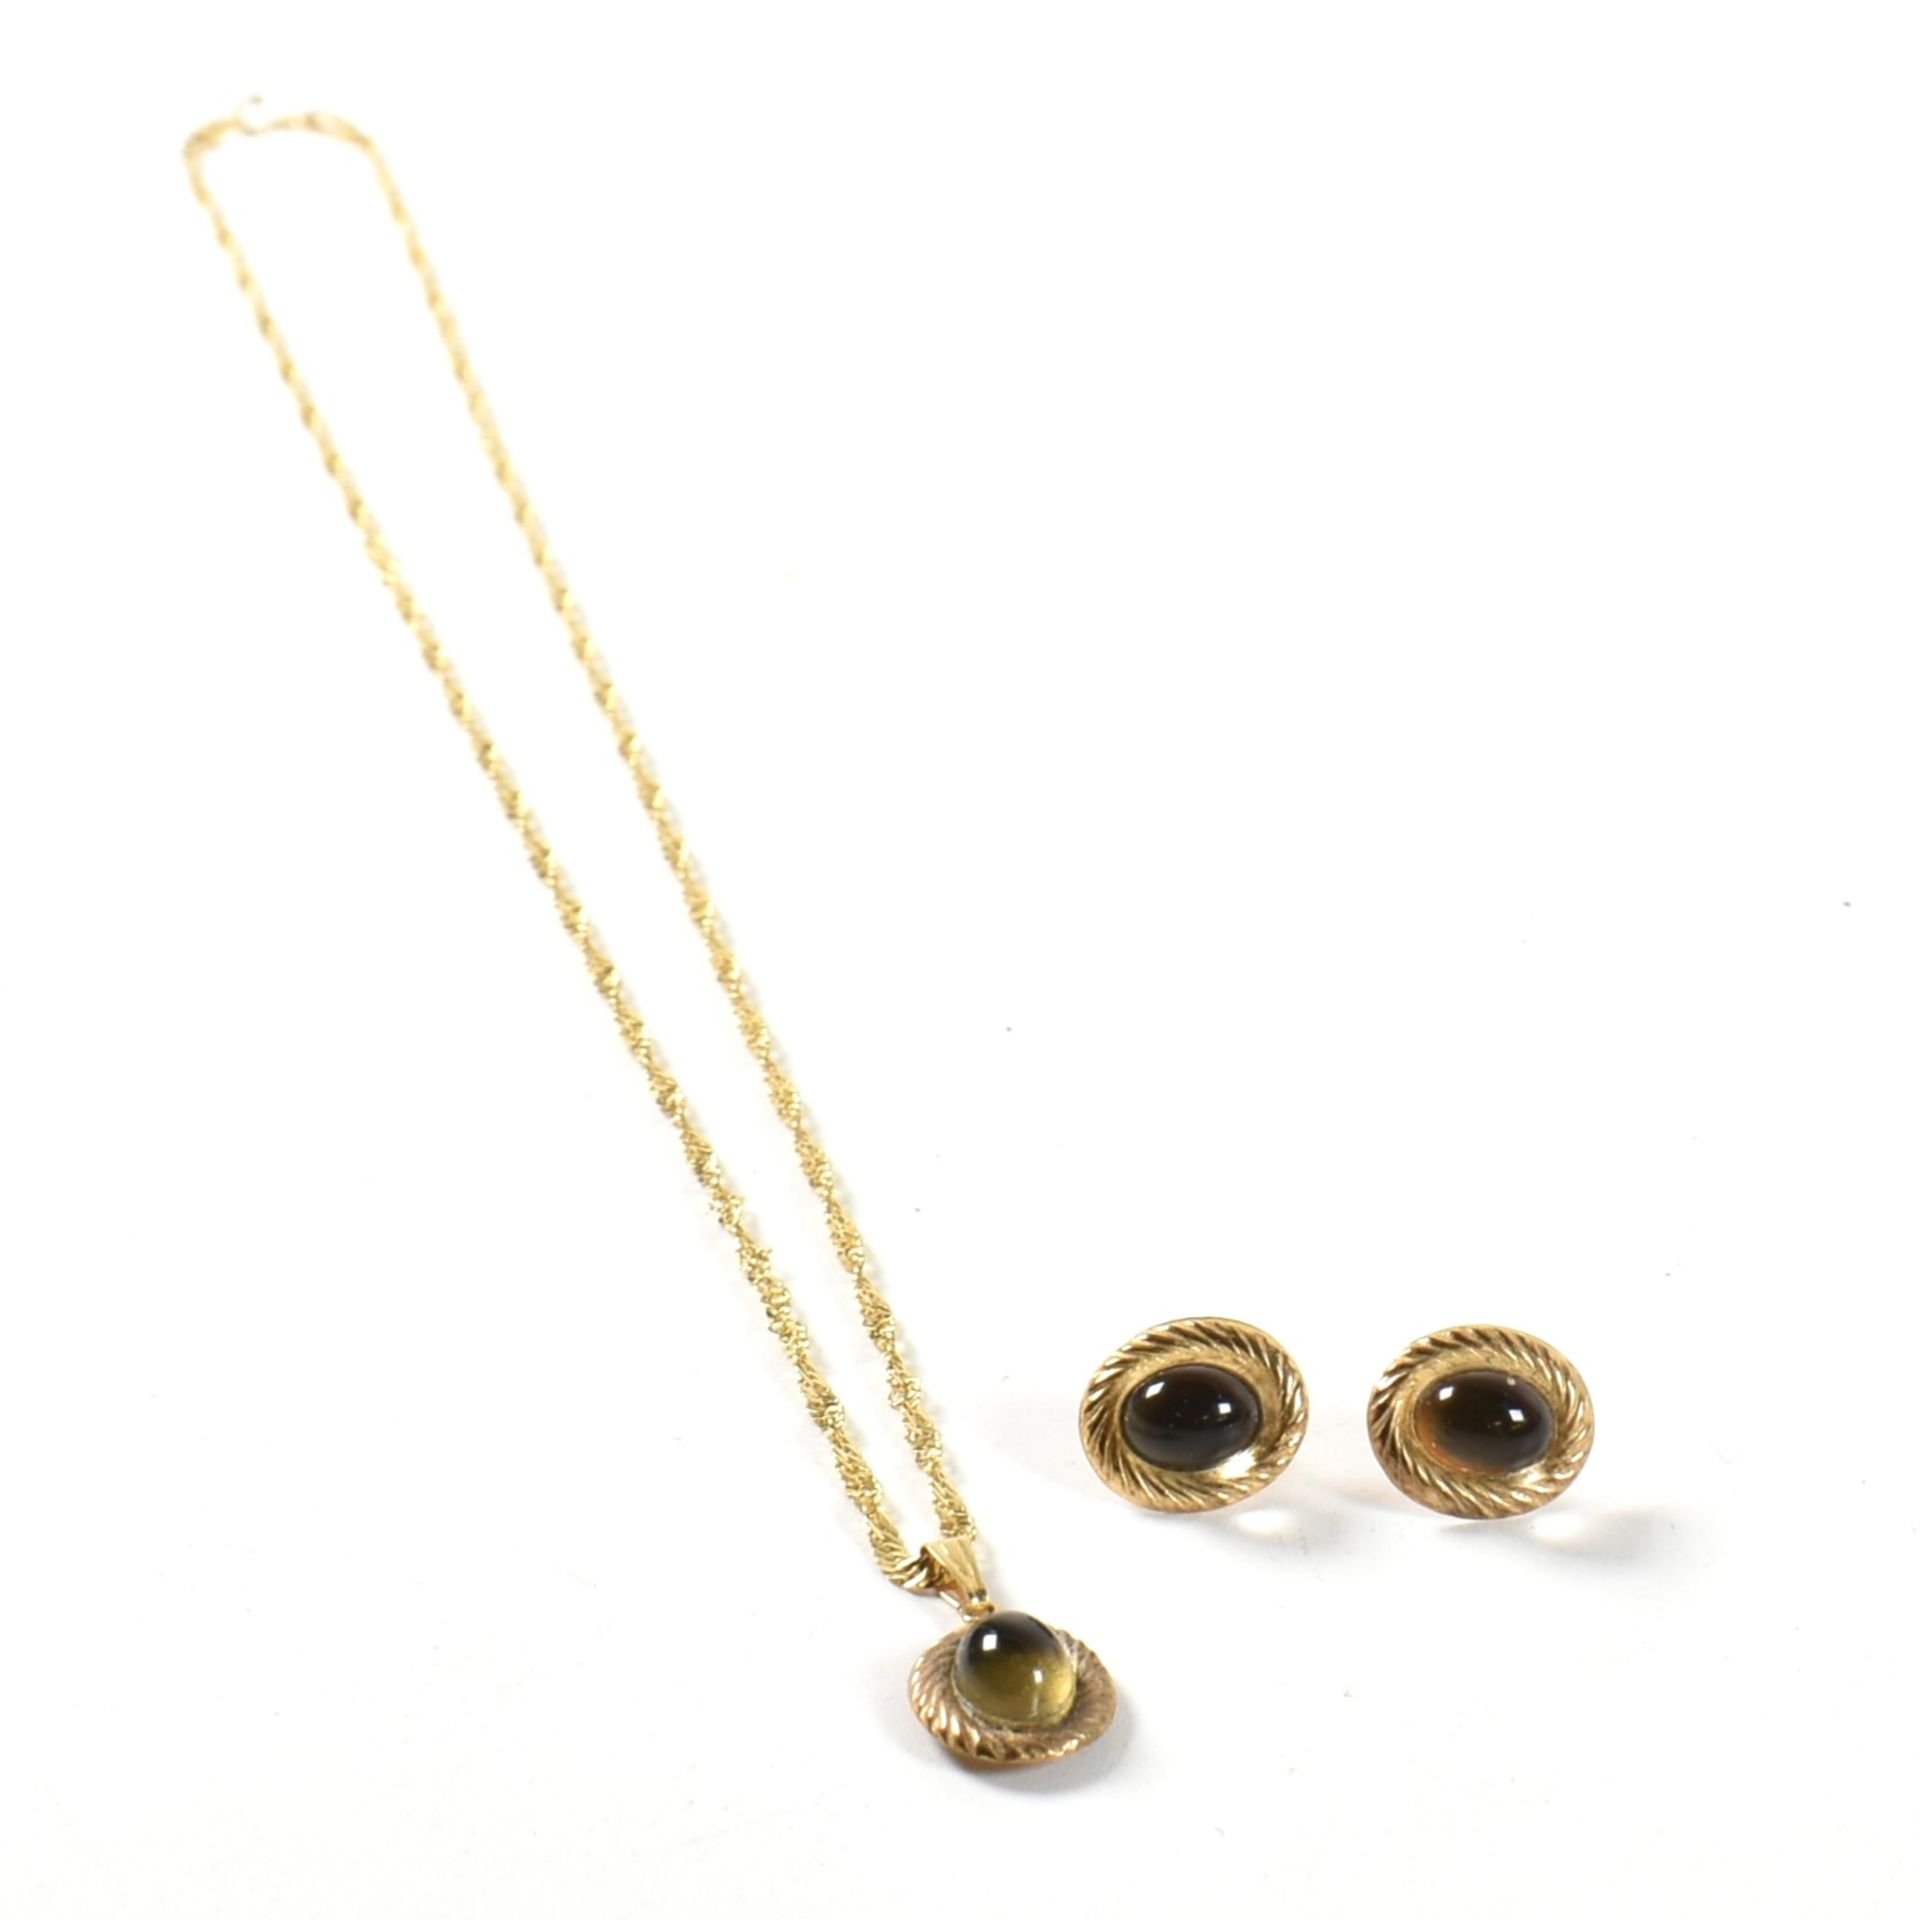 9CT GOLD & PASTE PENDANT NECKLACE & EARRING SET - Image 2 of 6